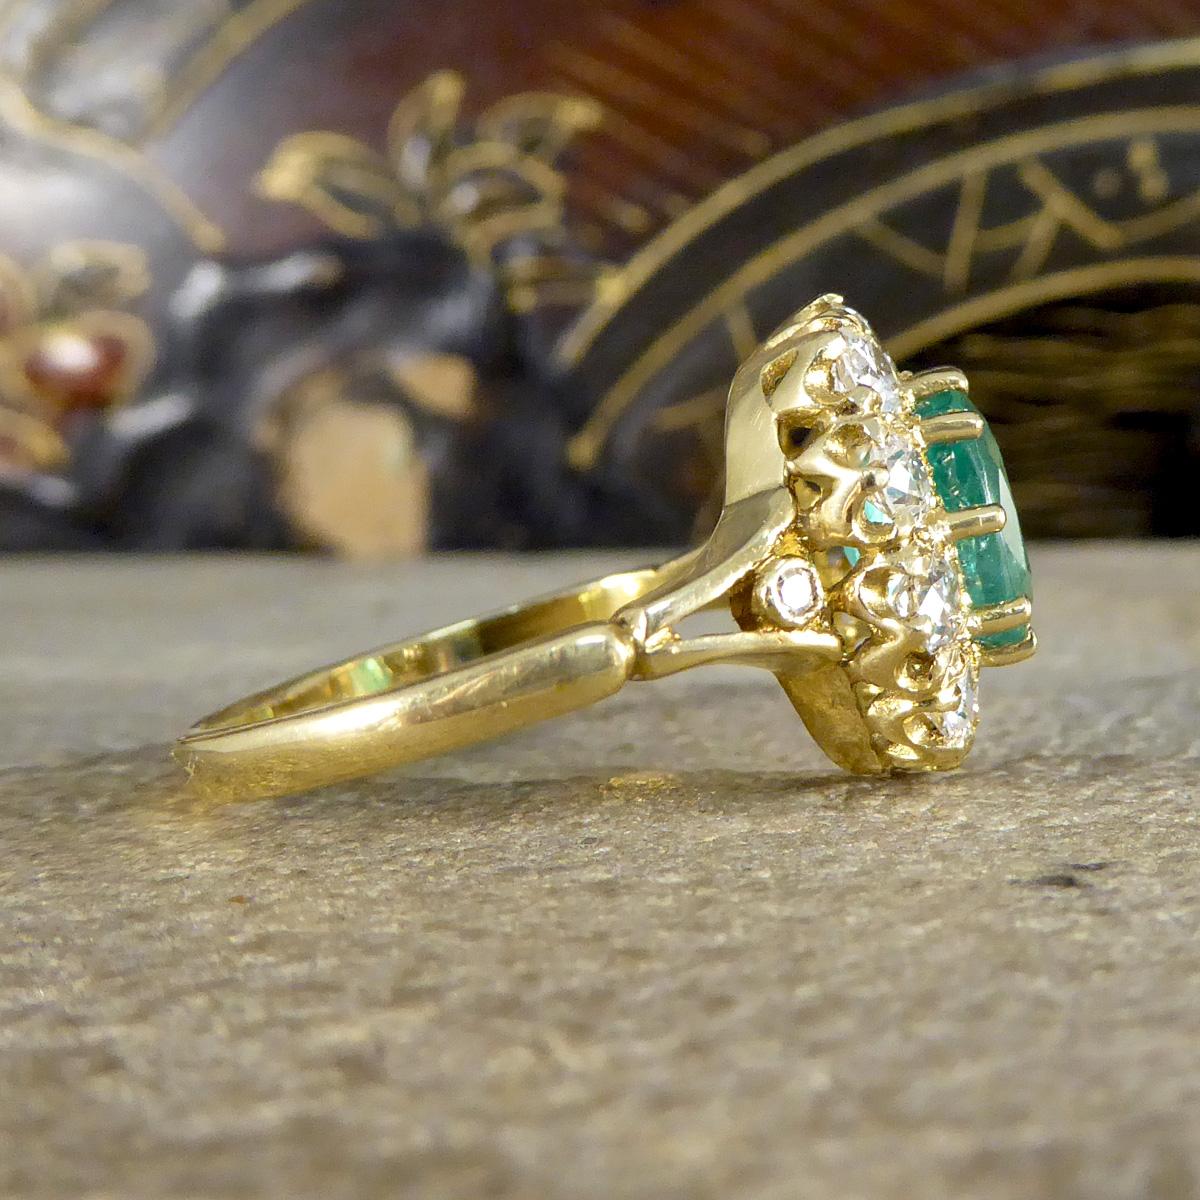 Edwardian 1.82ct Emerald and 1.20ct Old Cut Diamond Cluster Ring in 18ct Yellow Gold